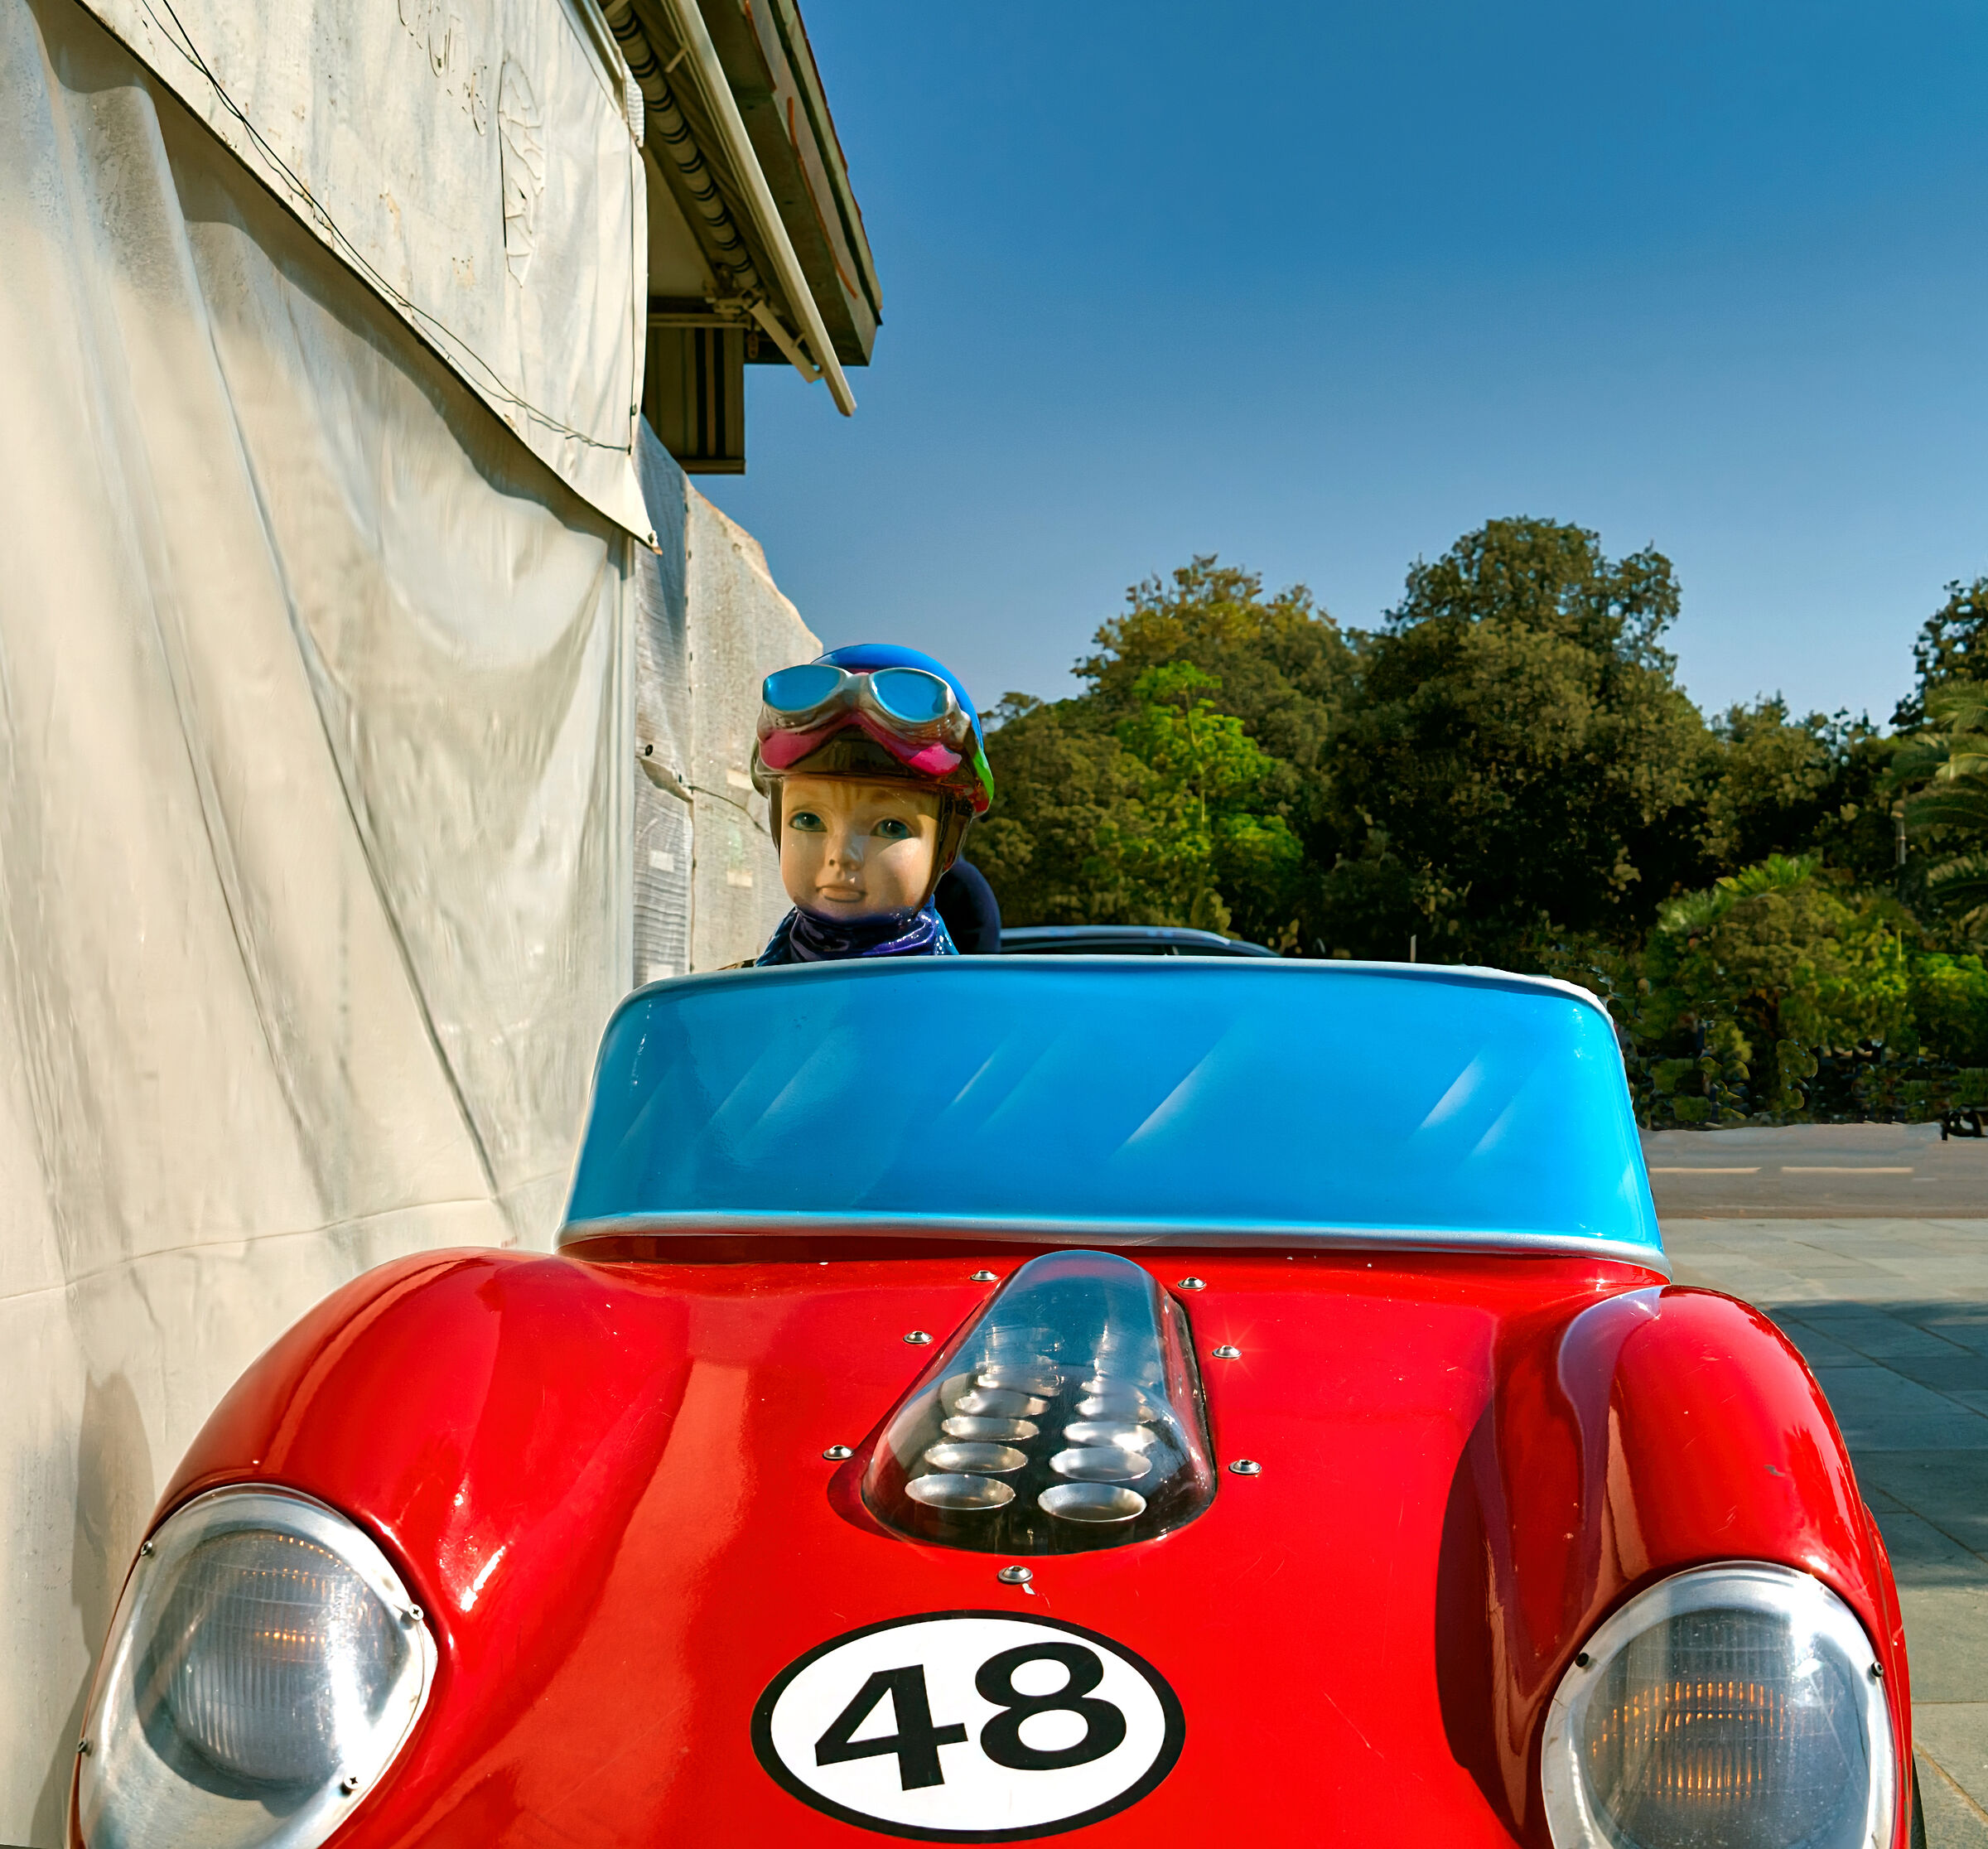 I would have liked to participate in the Mille Miglia but......